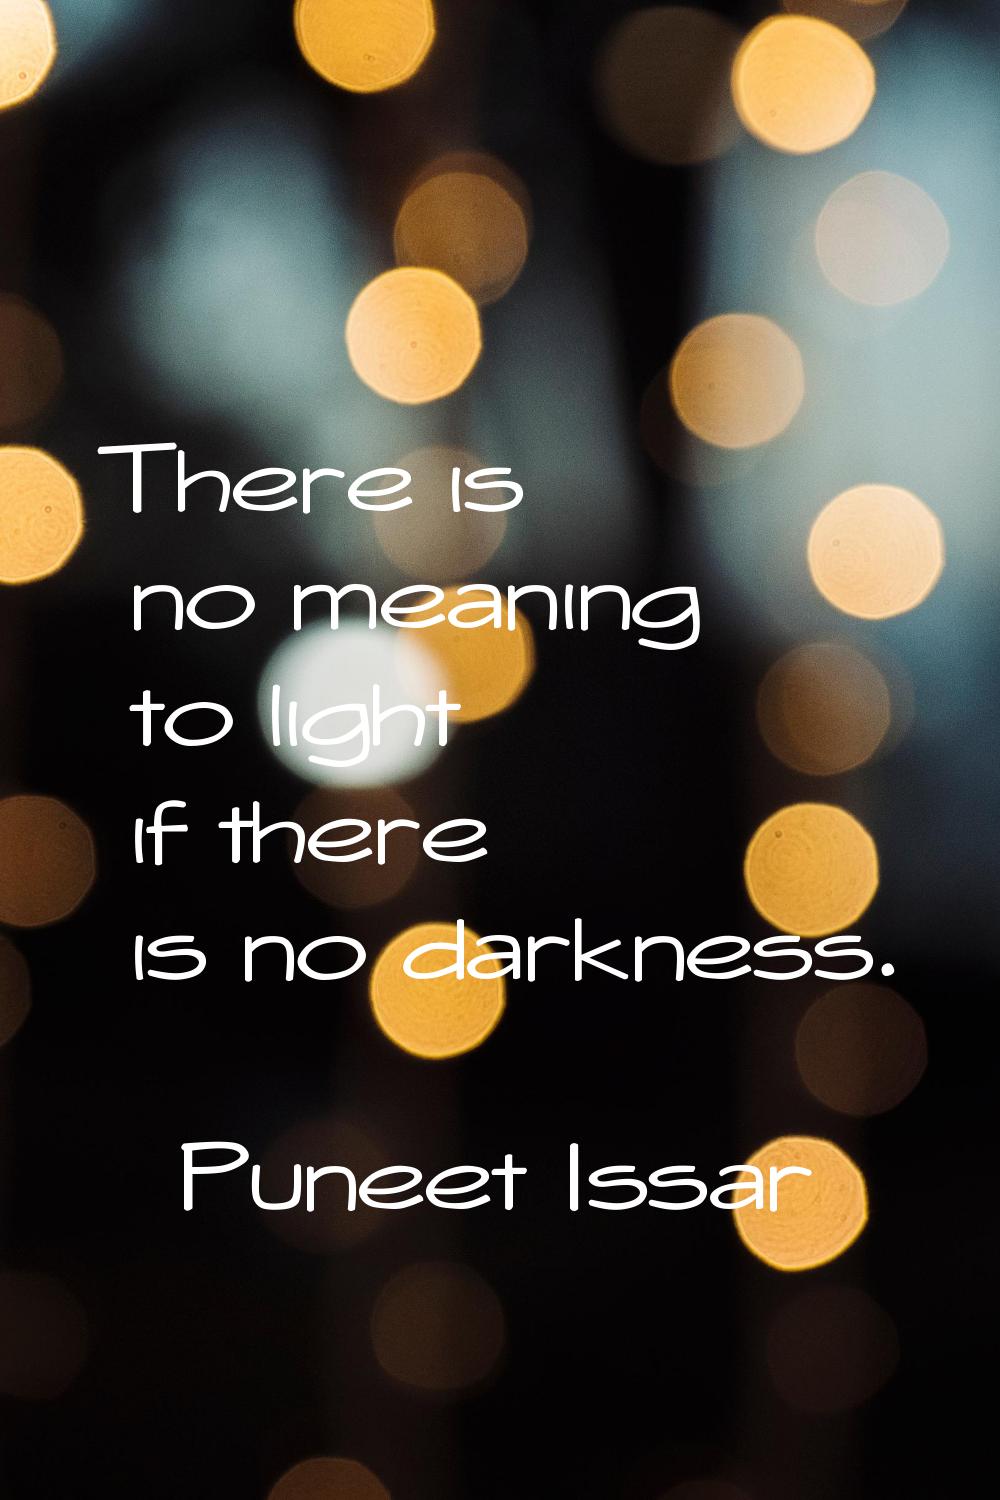 There is no meaning to light if there is no darkness.